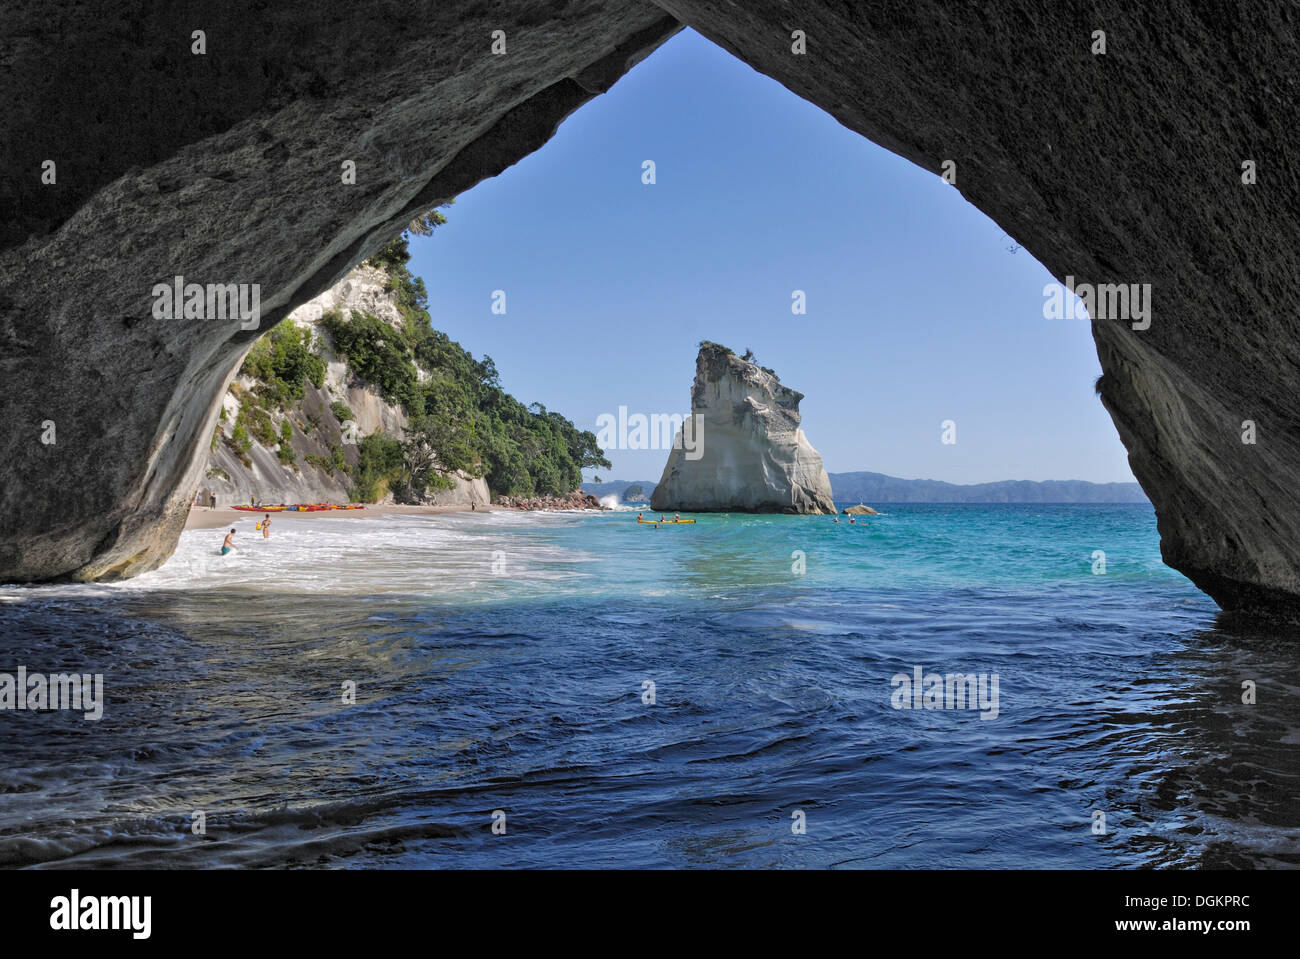 View through the rock arch in the Marine Reserve Cathedral Cove, Hahei, Coromandel Peninsula, North Island, New Zealand Stock Photo